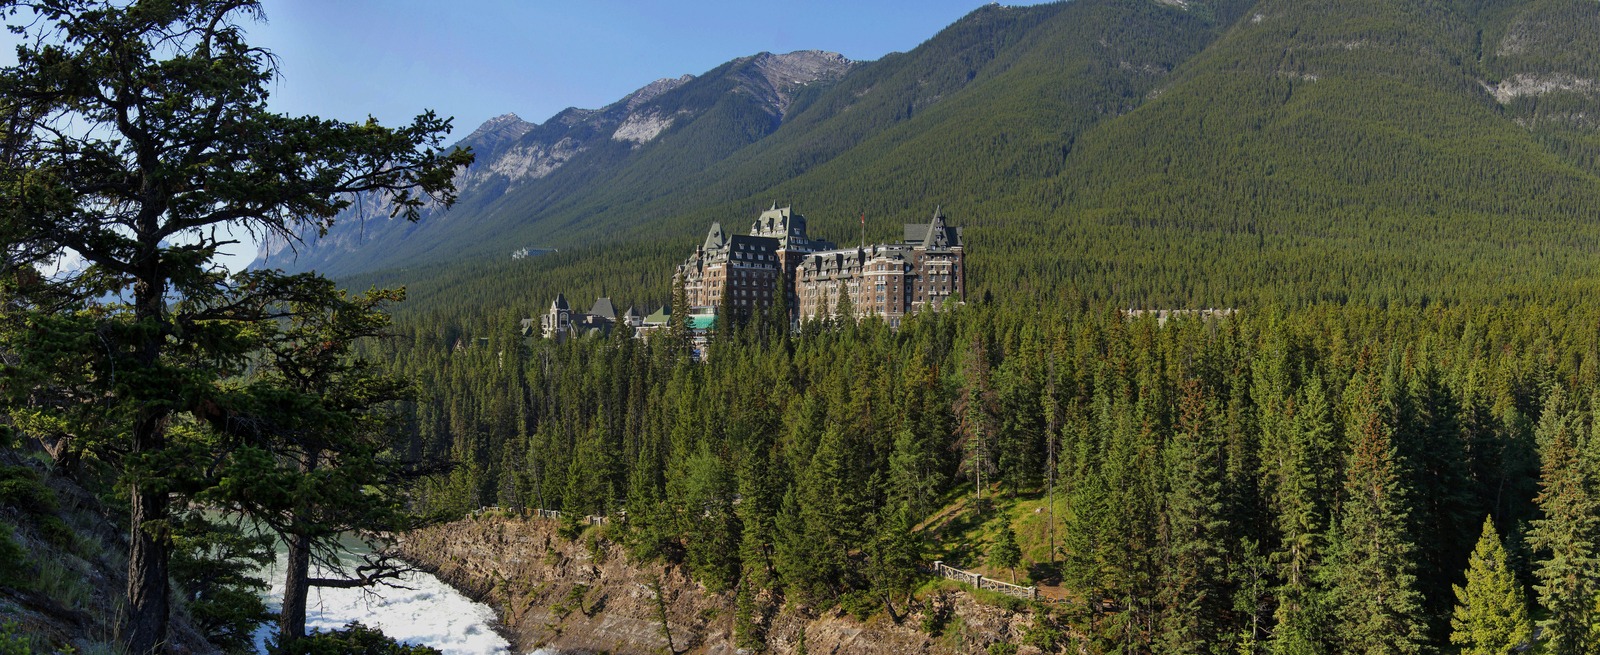 Panorama view of the Banff Springs Hotel with Bow River, Banff National Park